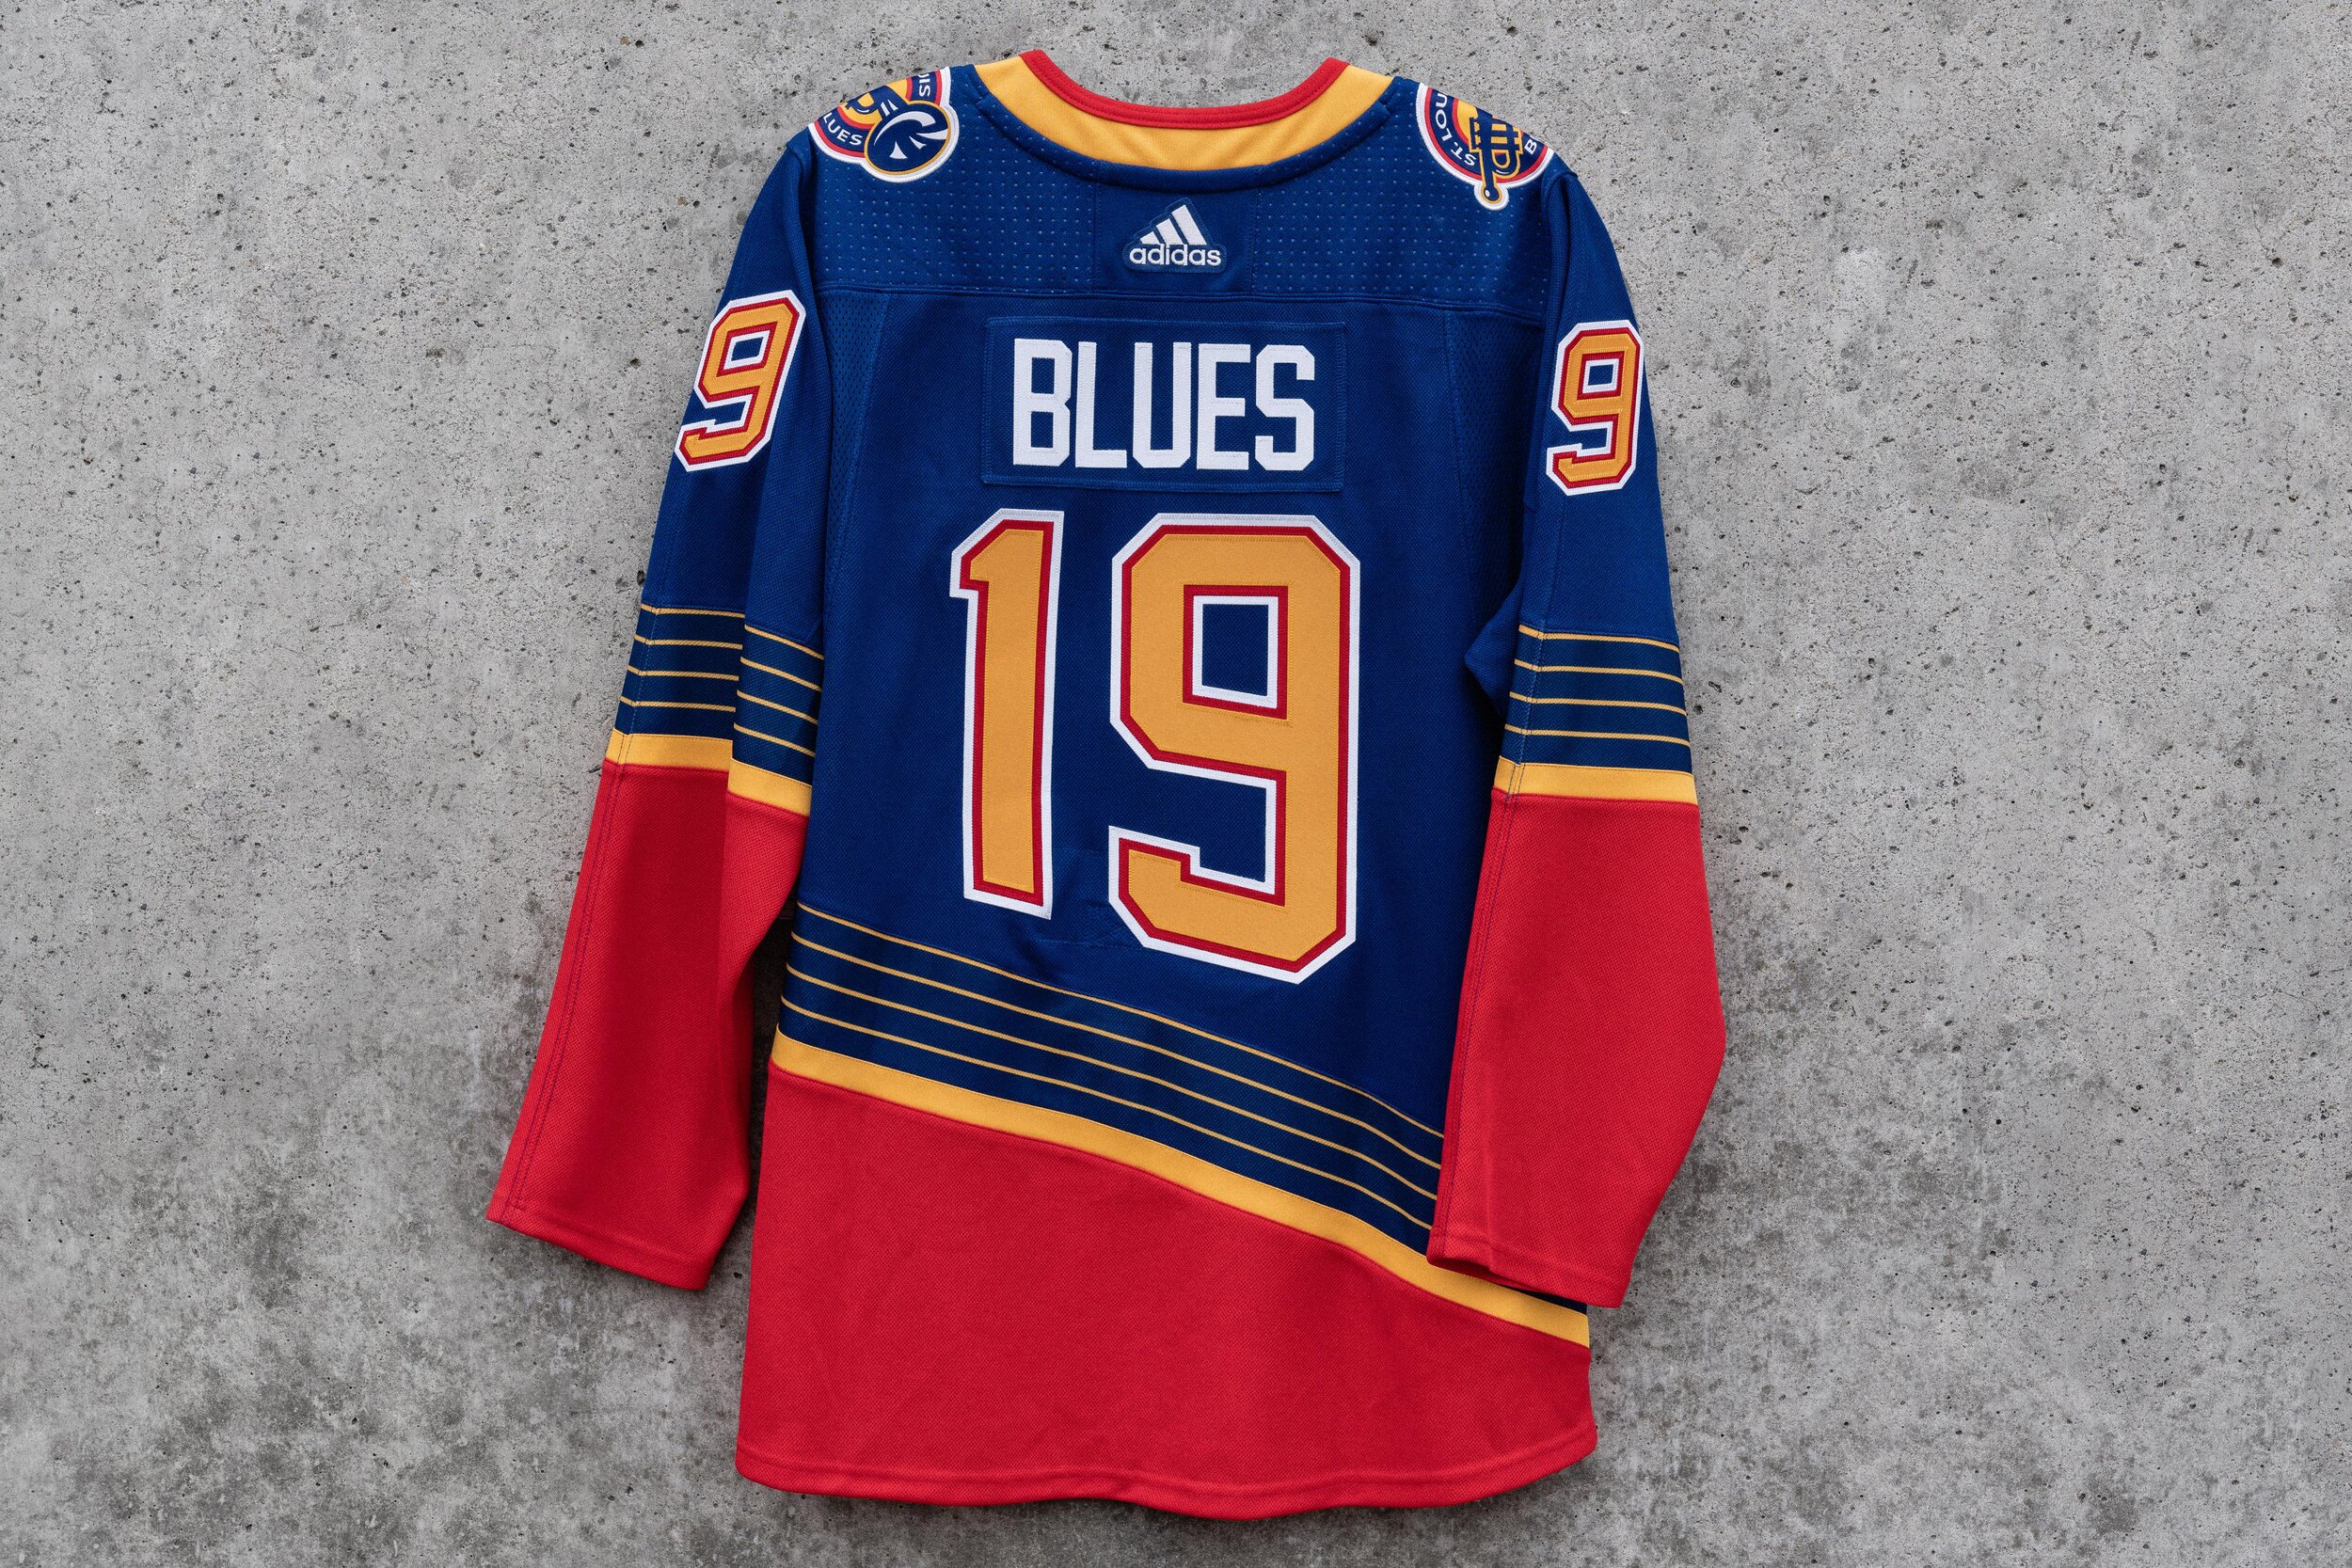 St. Louis Blues Revive Short-Lived Uniform From 1990s As Alternate For  2019-20 Season